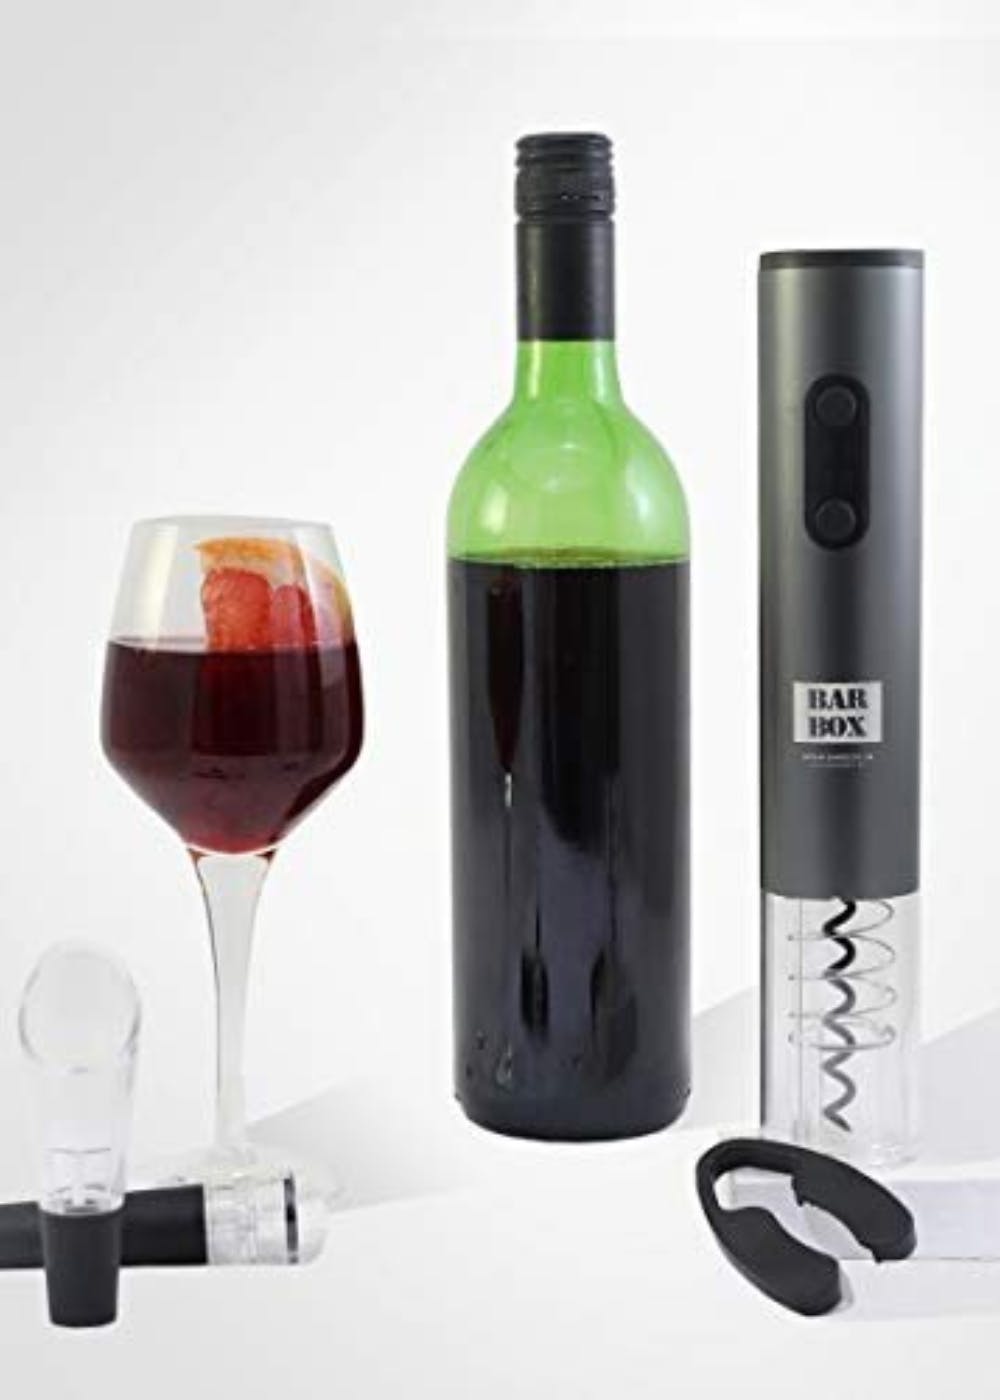 Oster Cordless Electric Wine Bottle Opener Review: Sleek and Durable